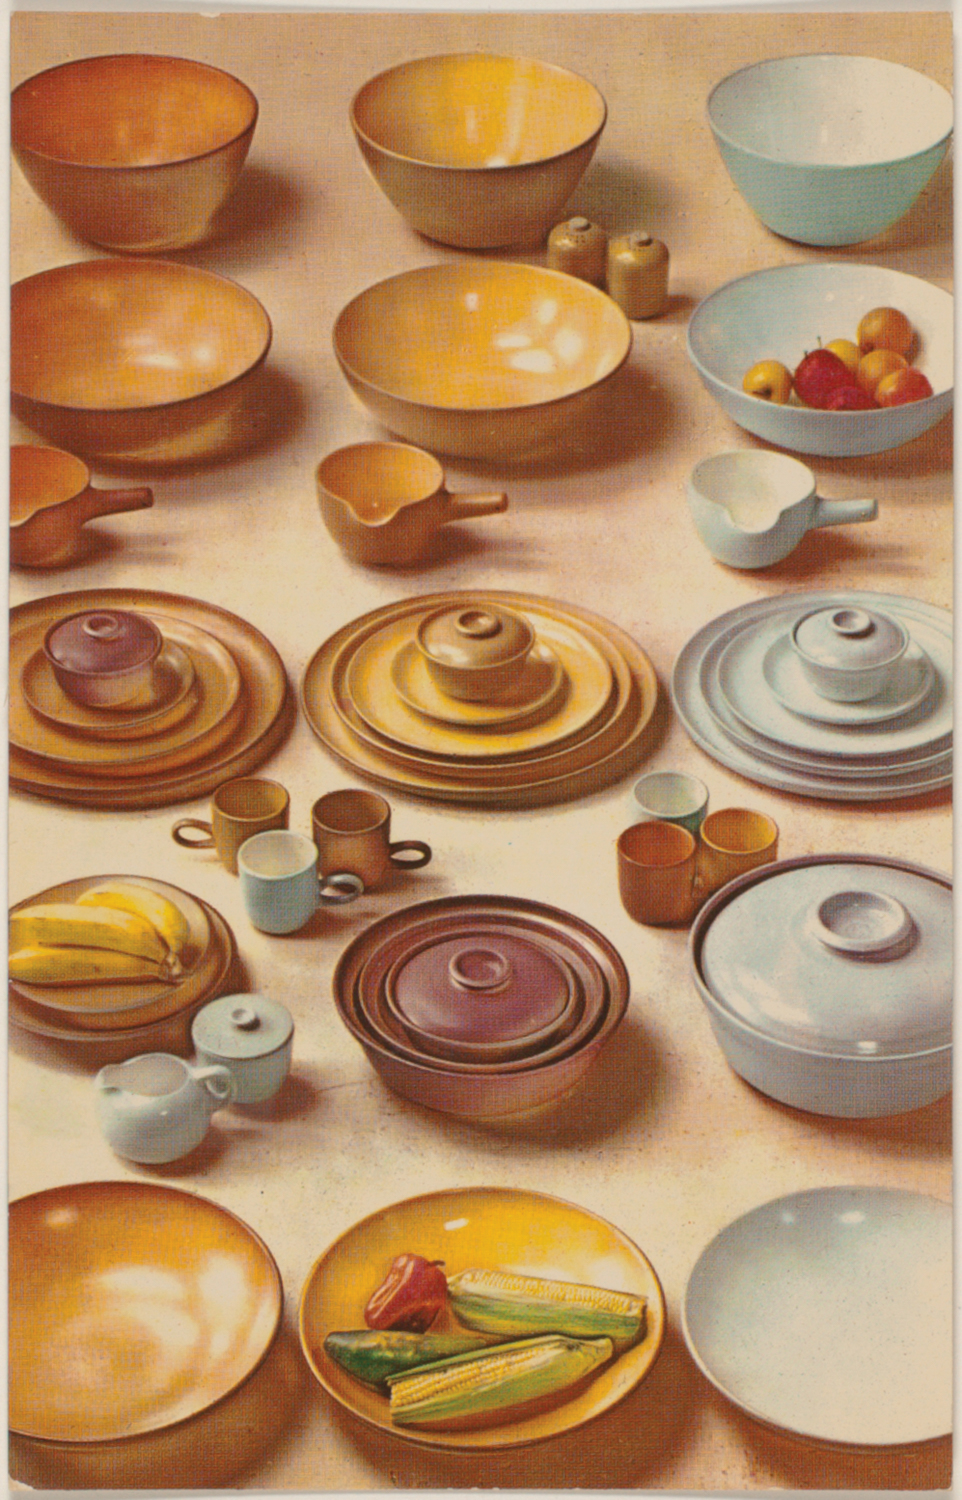 Selection of tableware pieces in yellow, light blue and mauve from Heath Ceramics.